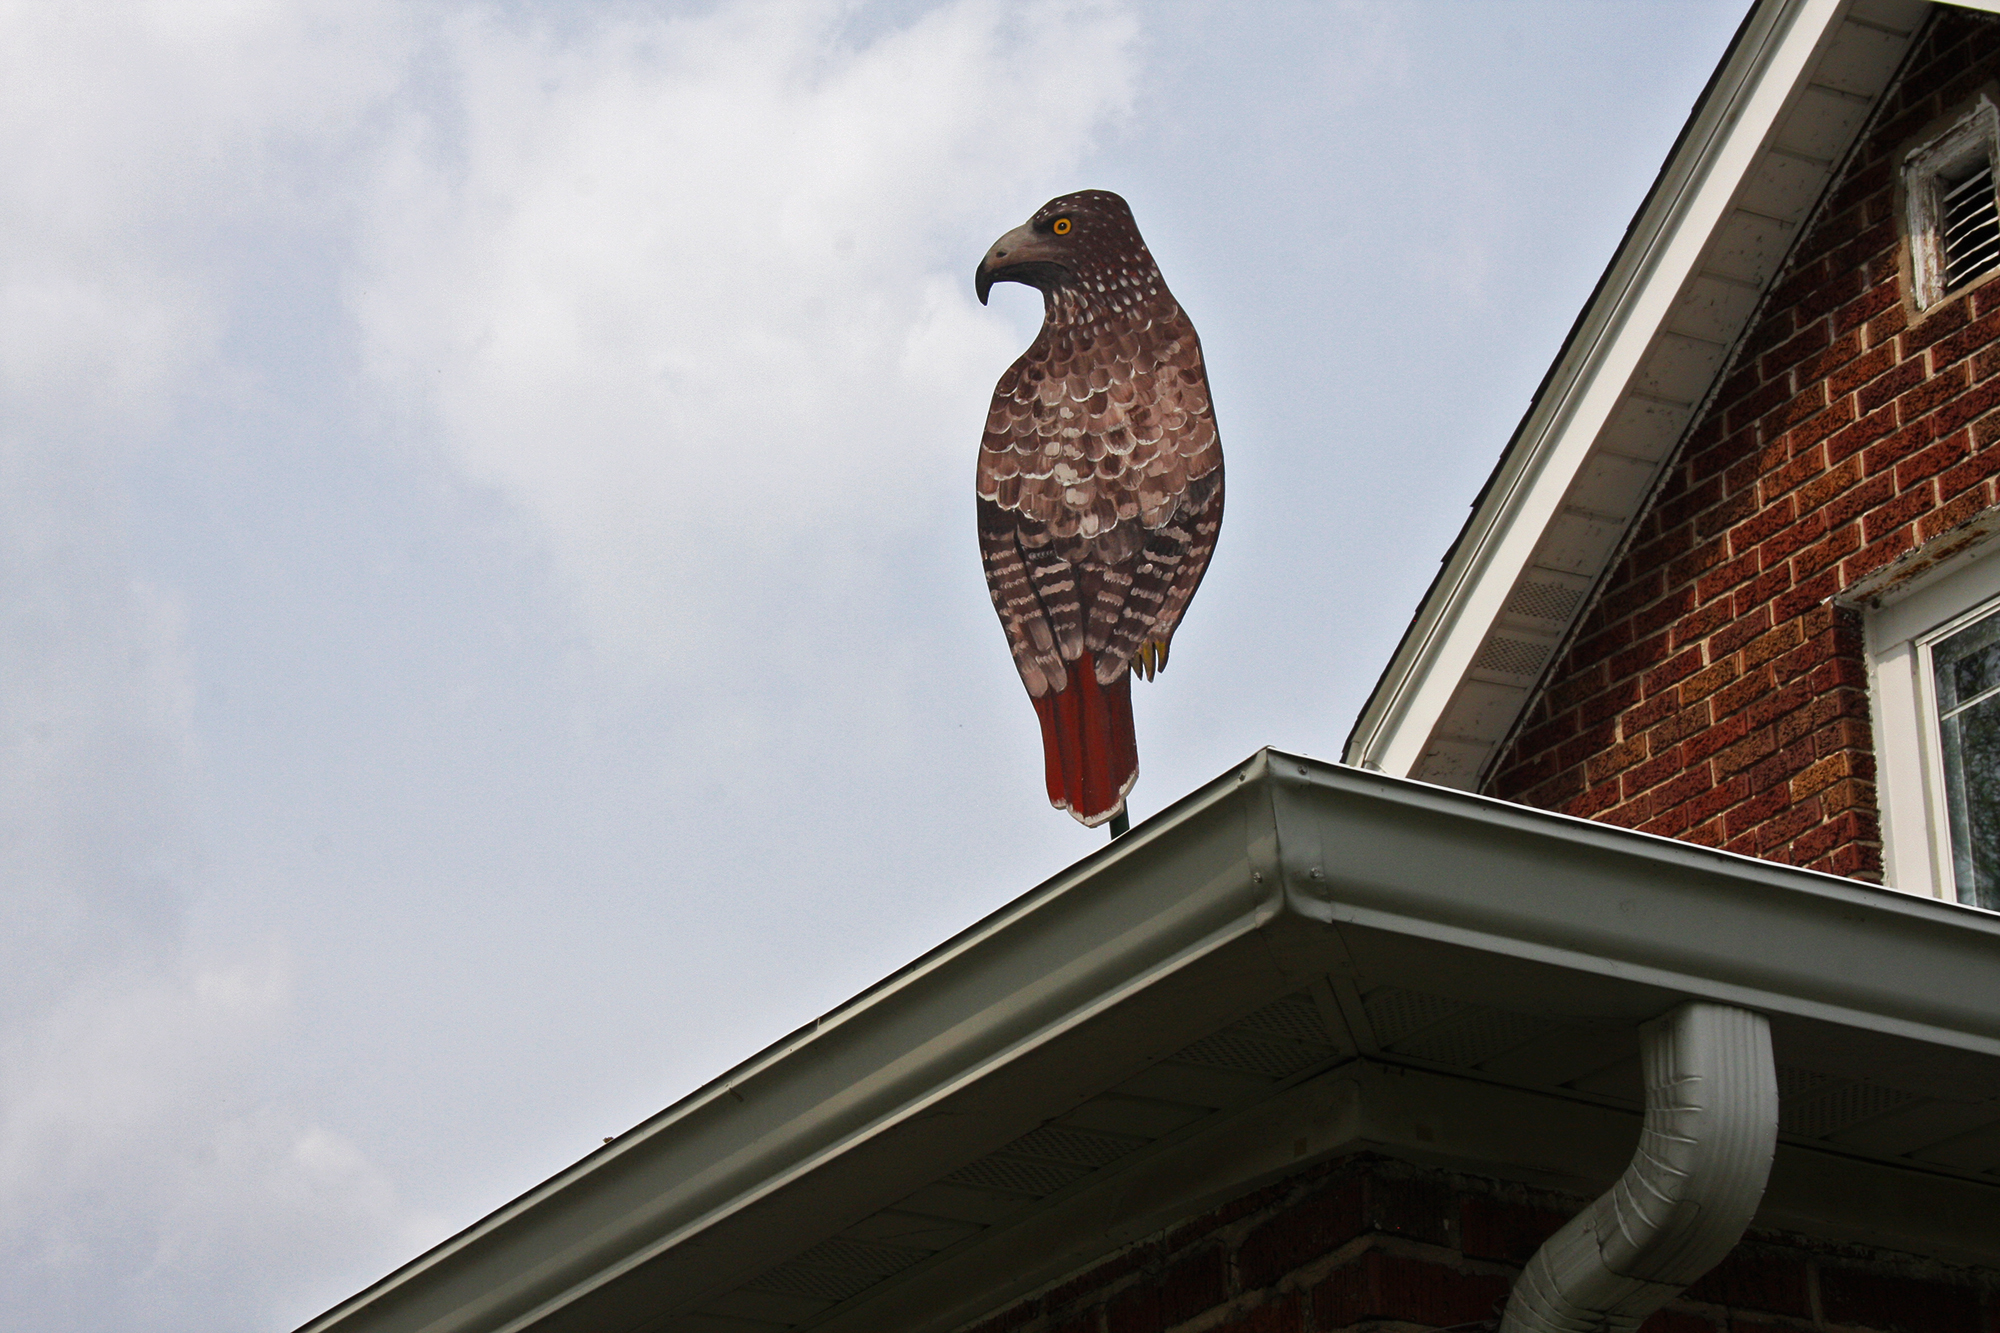 A wooden red-tailed hawk perched on a rooftop.